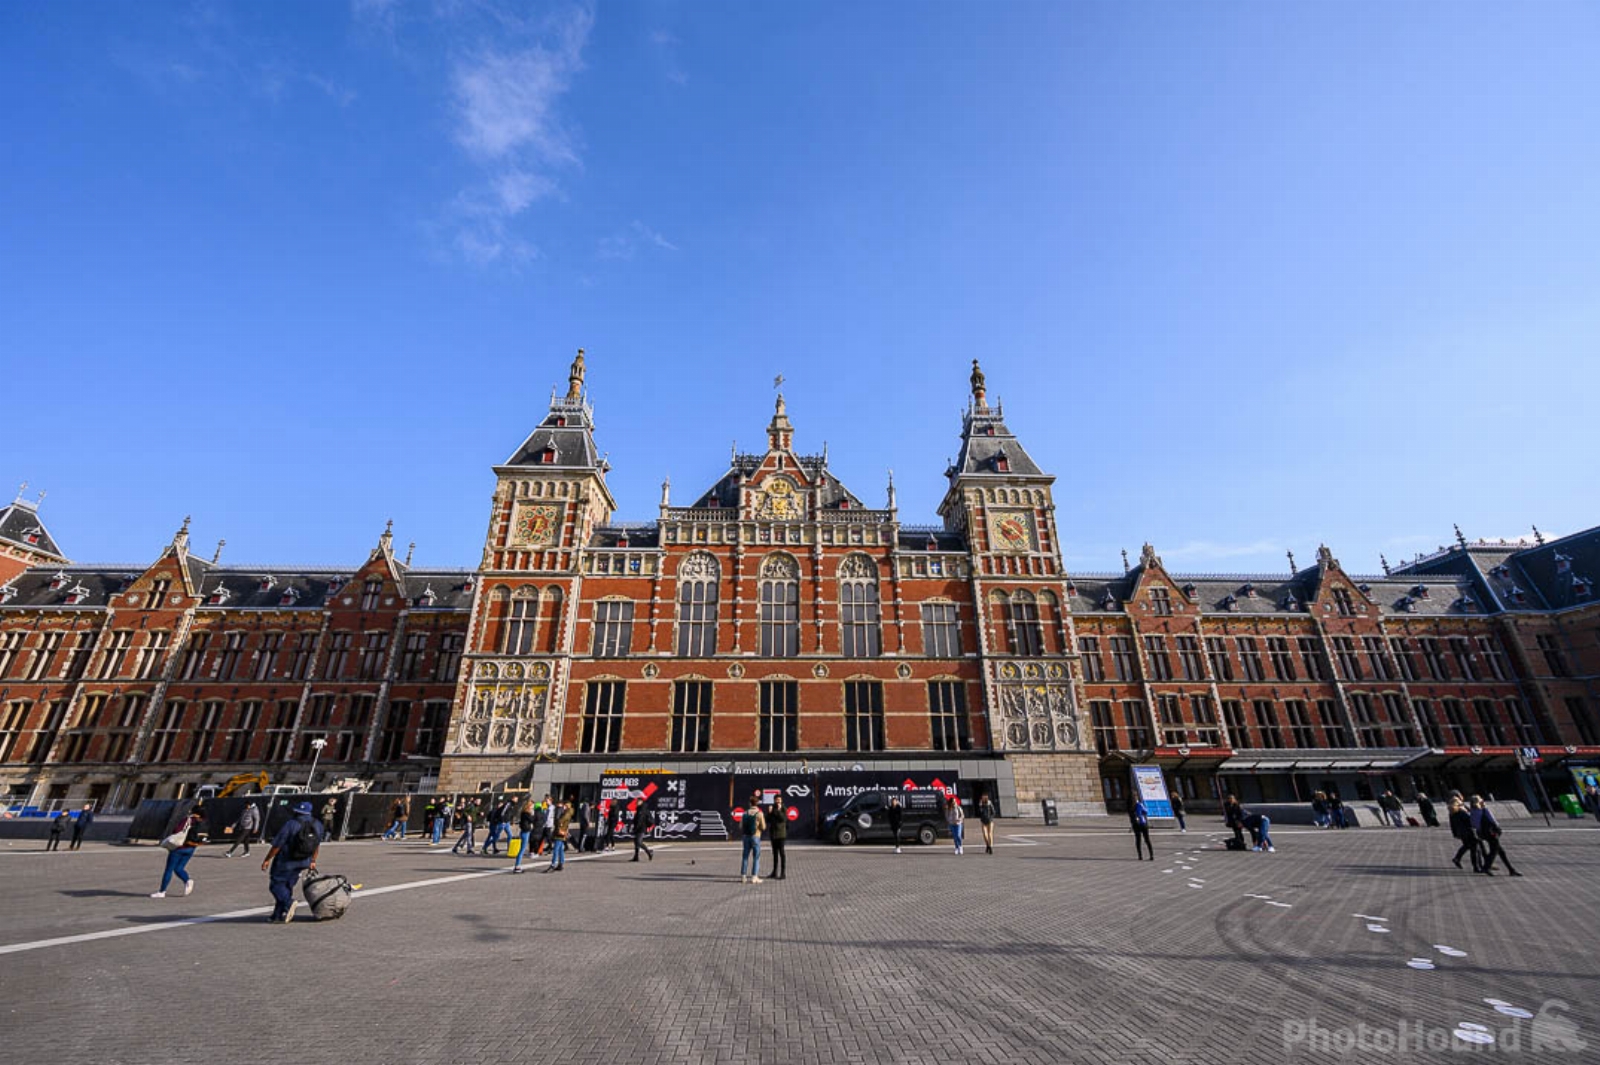 Image of Amsterdam Central Station by Szabolcs Gulacsi